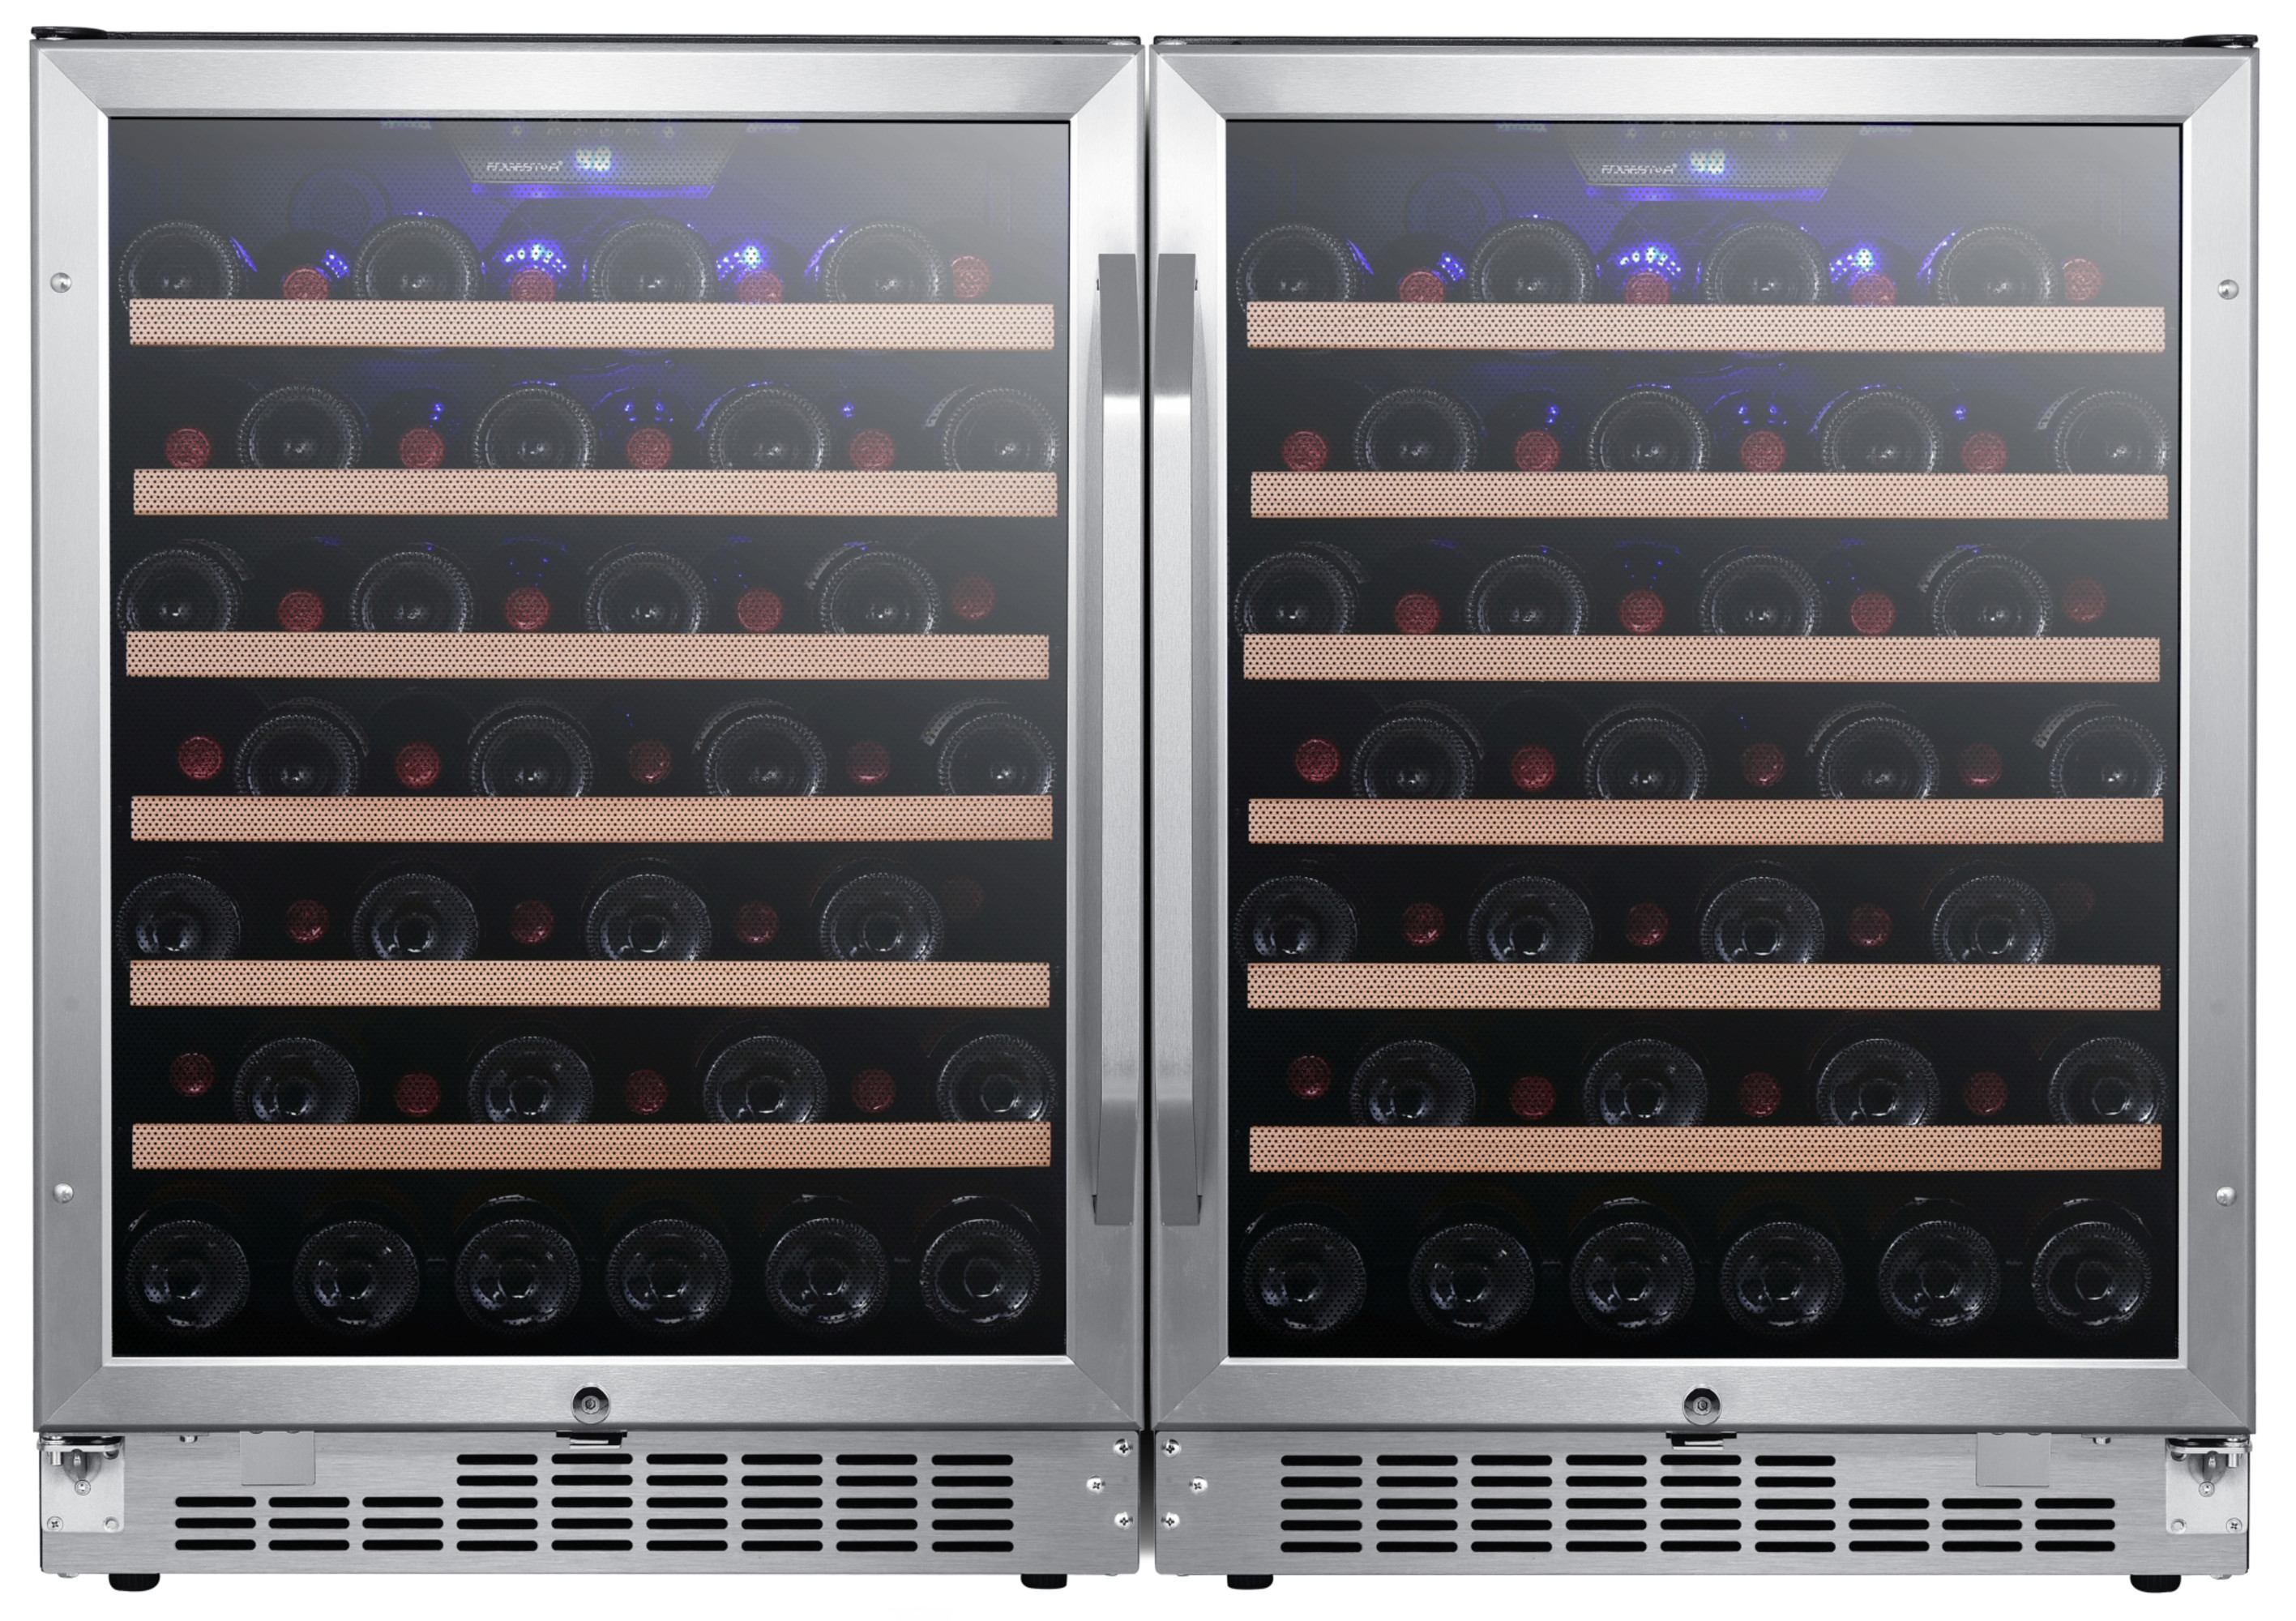 Edgestar Cwr532szdual 48" Wide 106 Bottle Built-In Side-By-Side Wine Cooler - Stainless - image 1 of 2